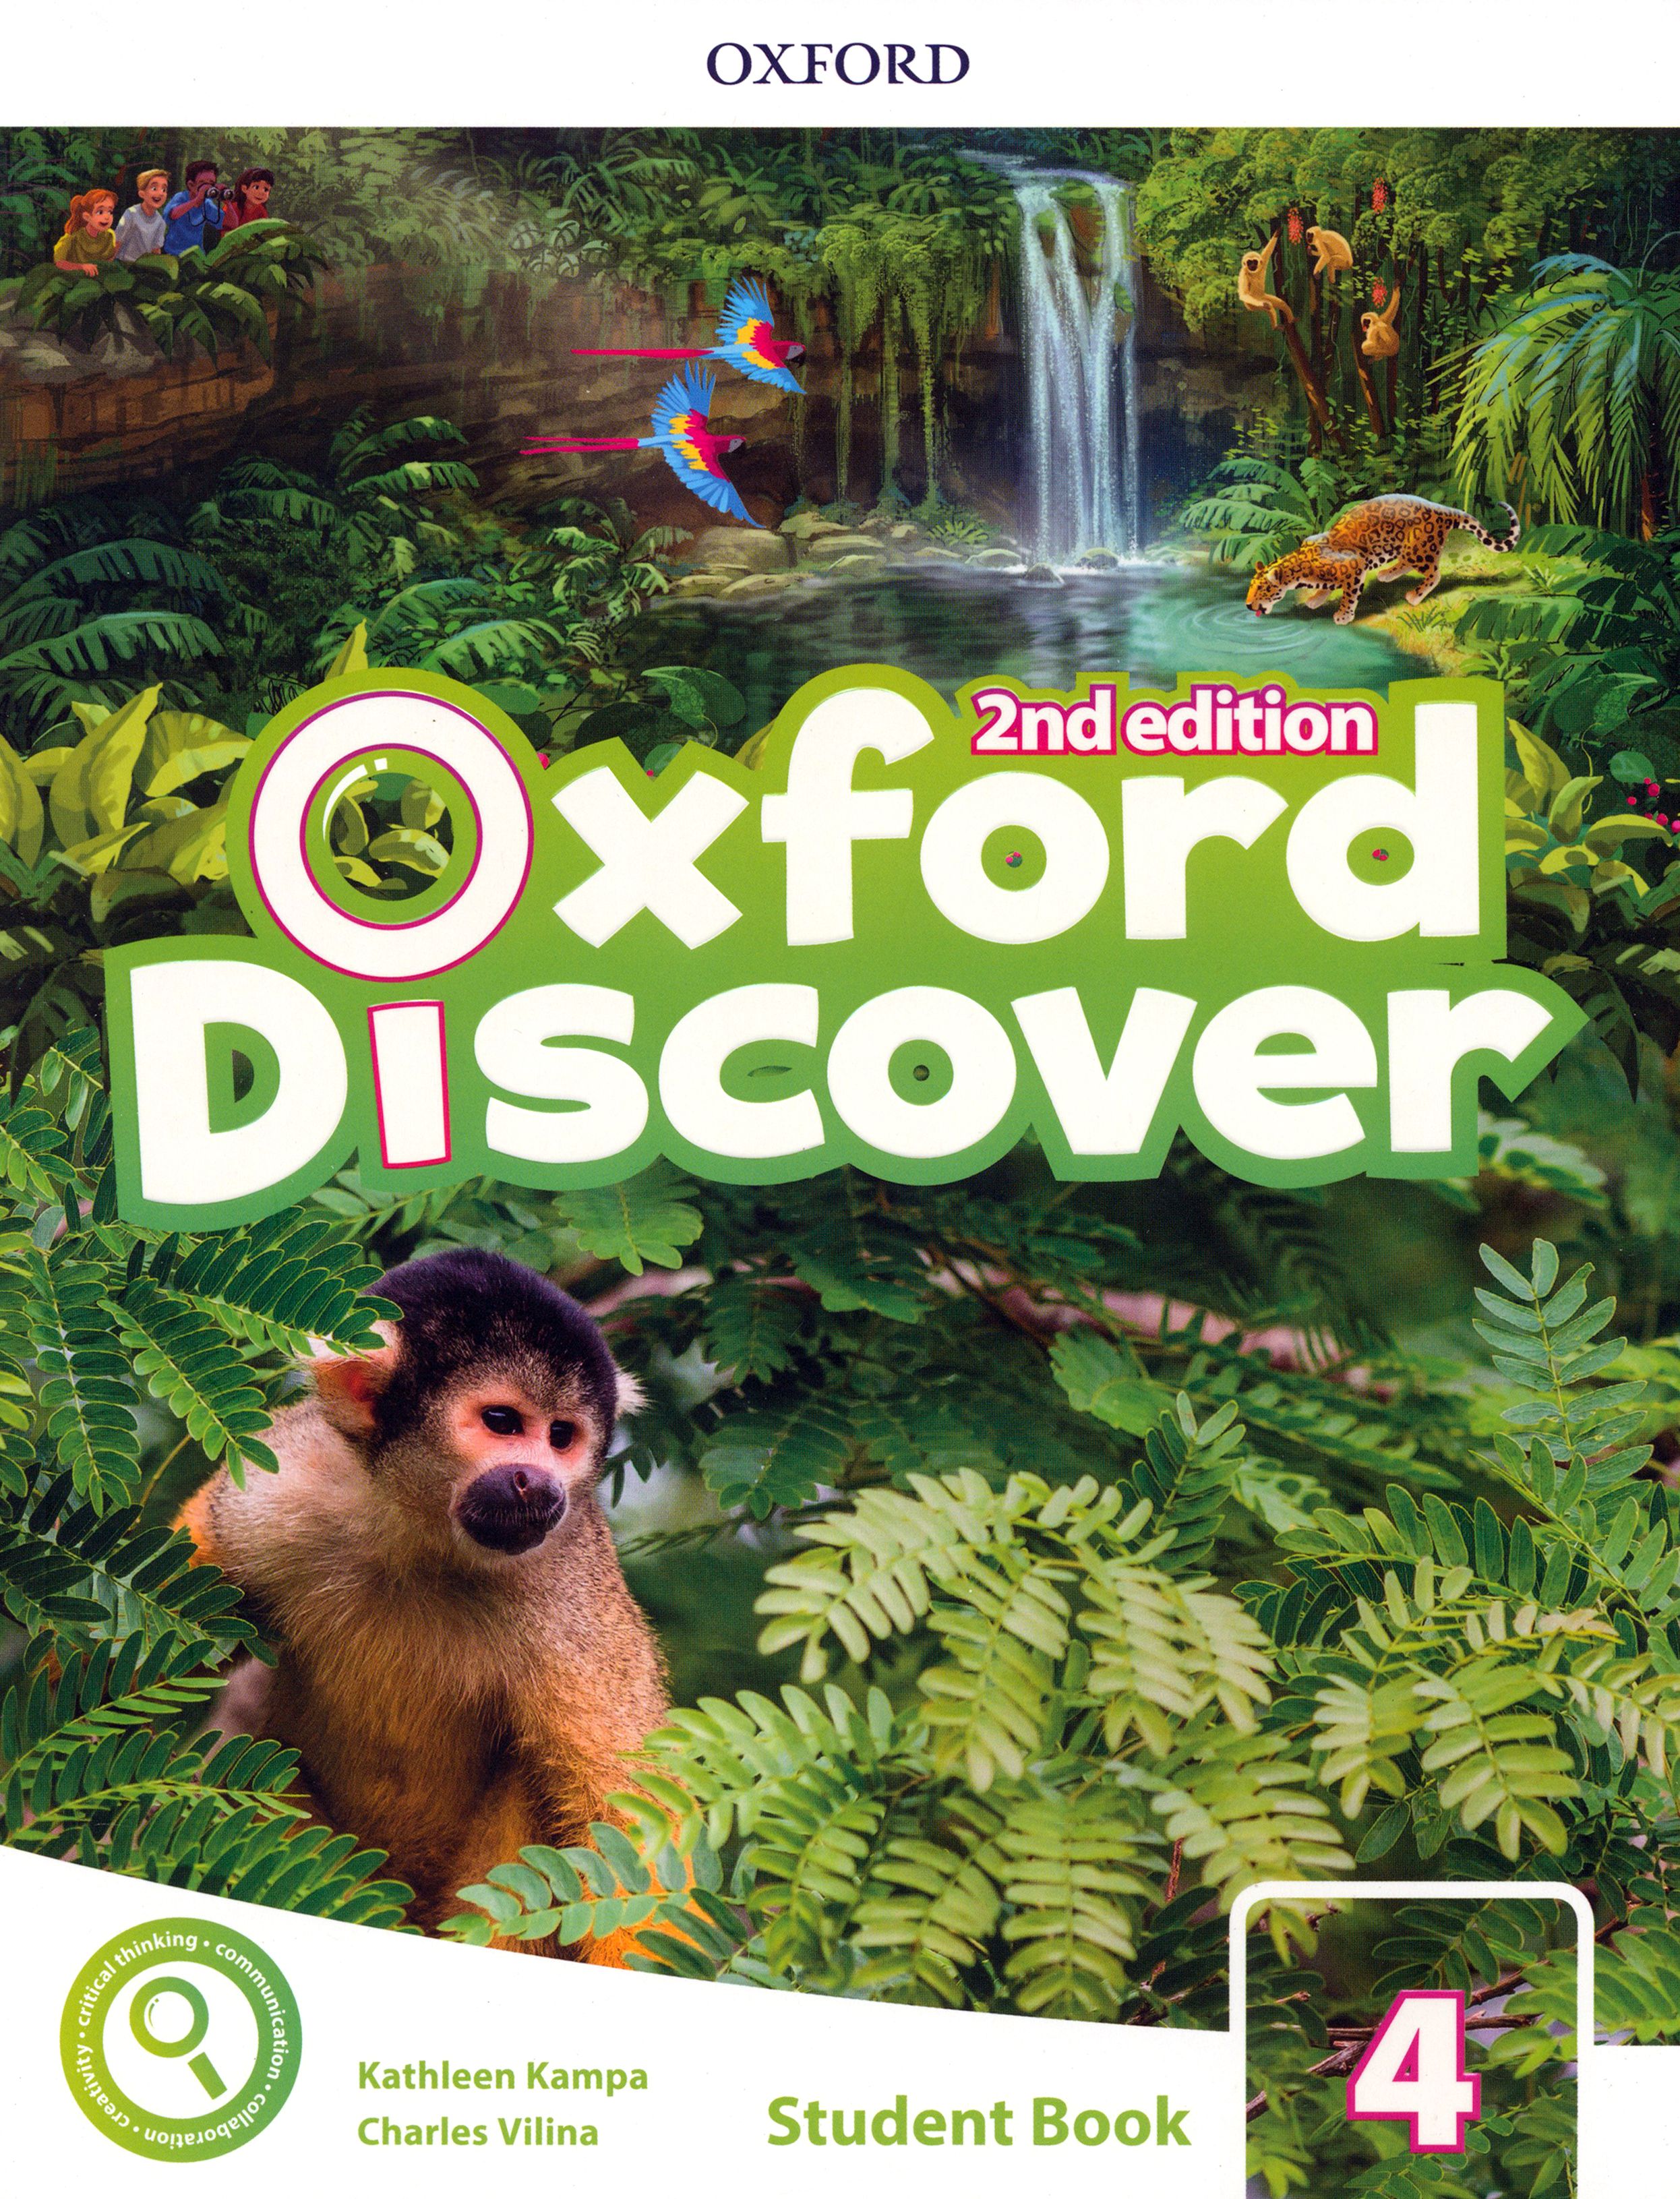 Discover students book. Oxford discover 4 2nd Edition. Oxford discover 2nd Edition 5. Oxford discover 2nd Edition. Oxford discover 2 student book.